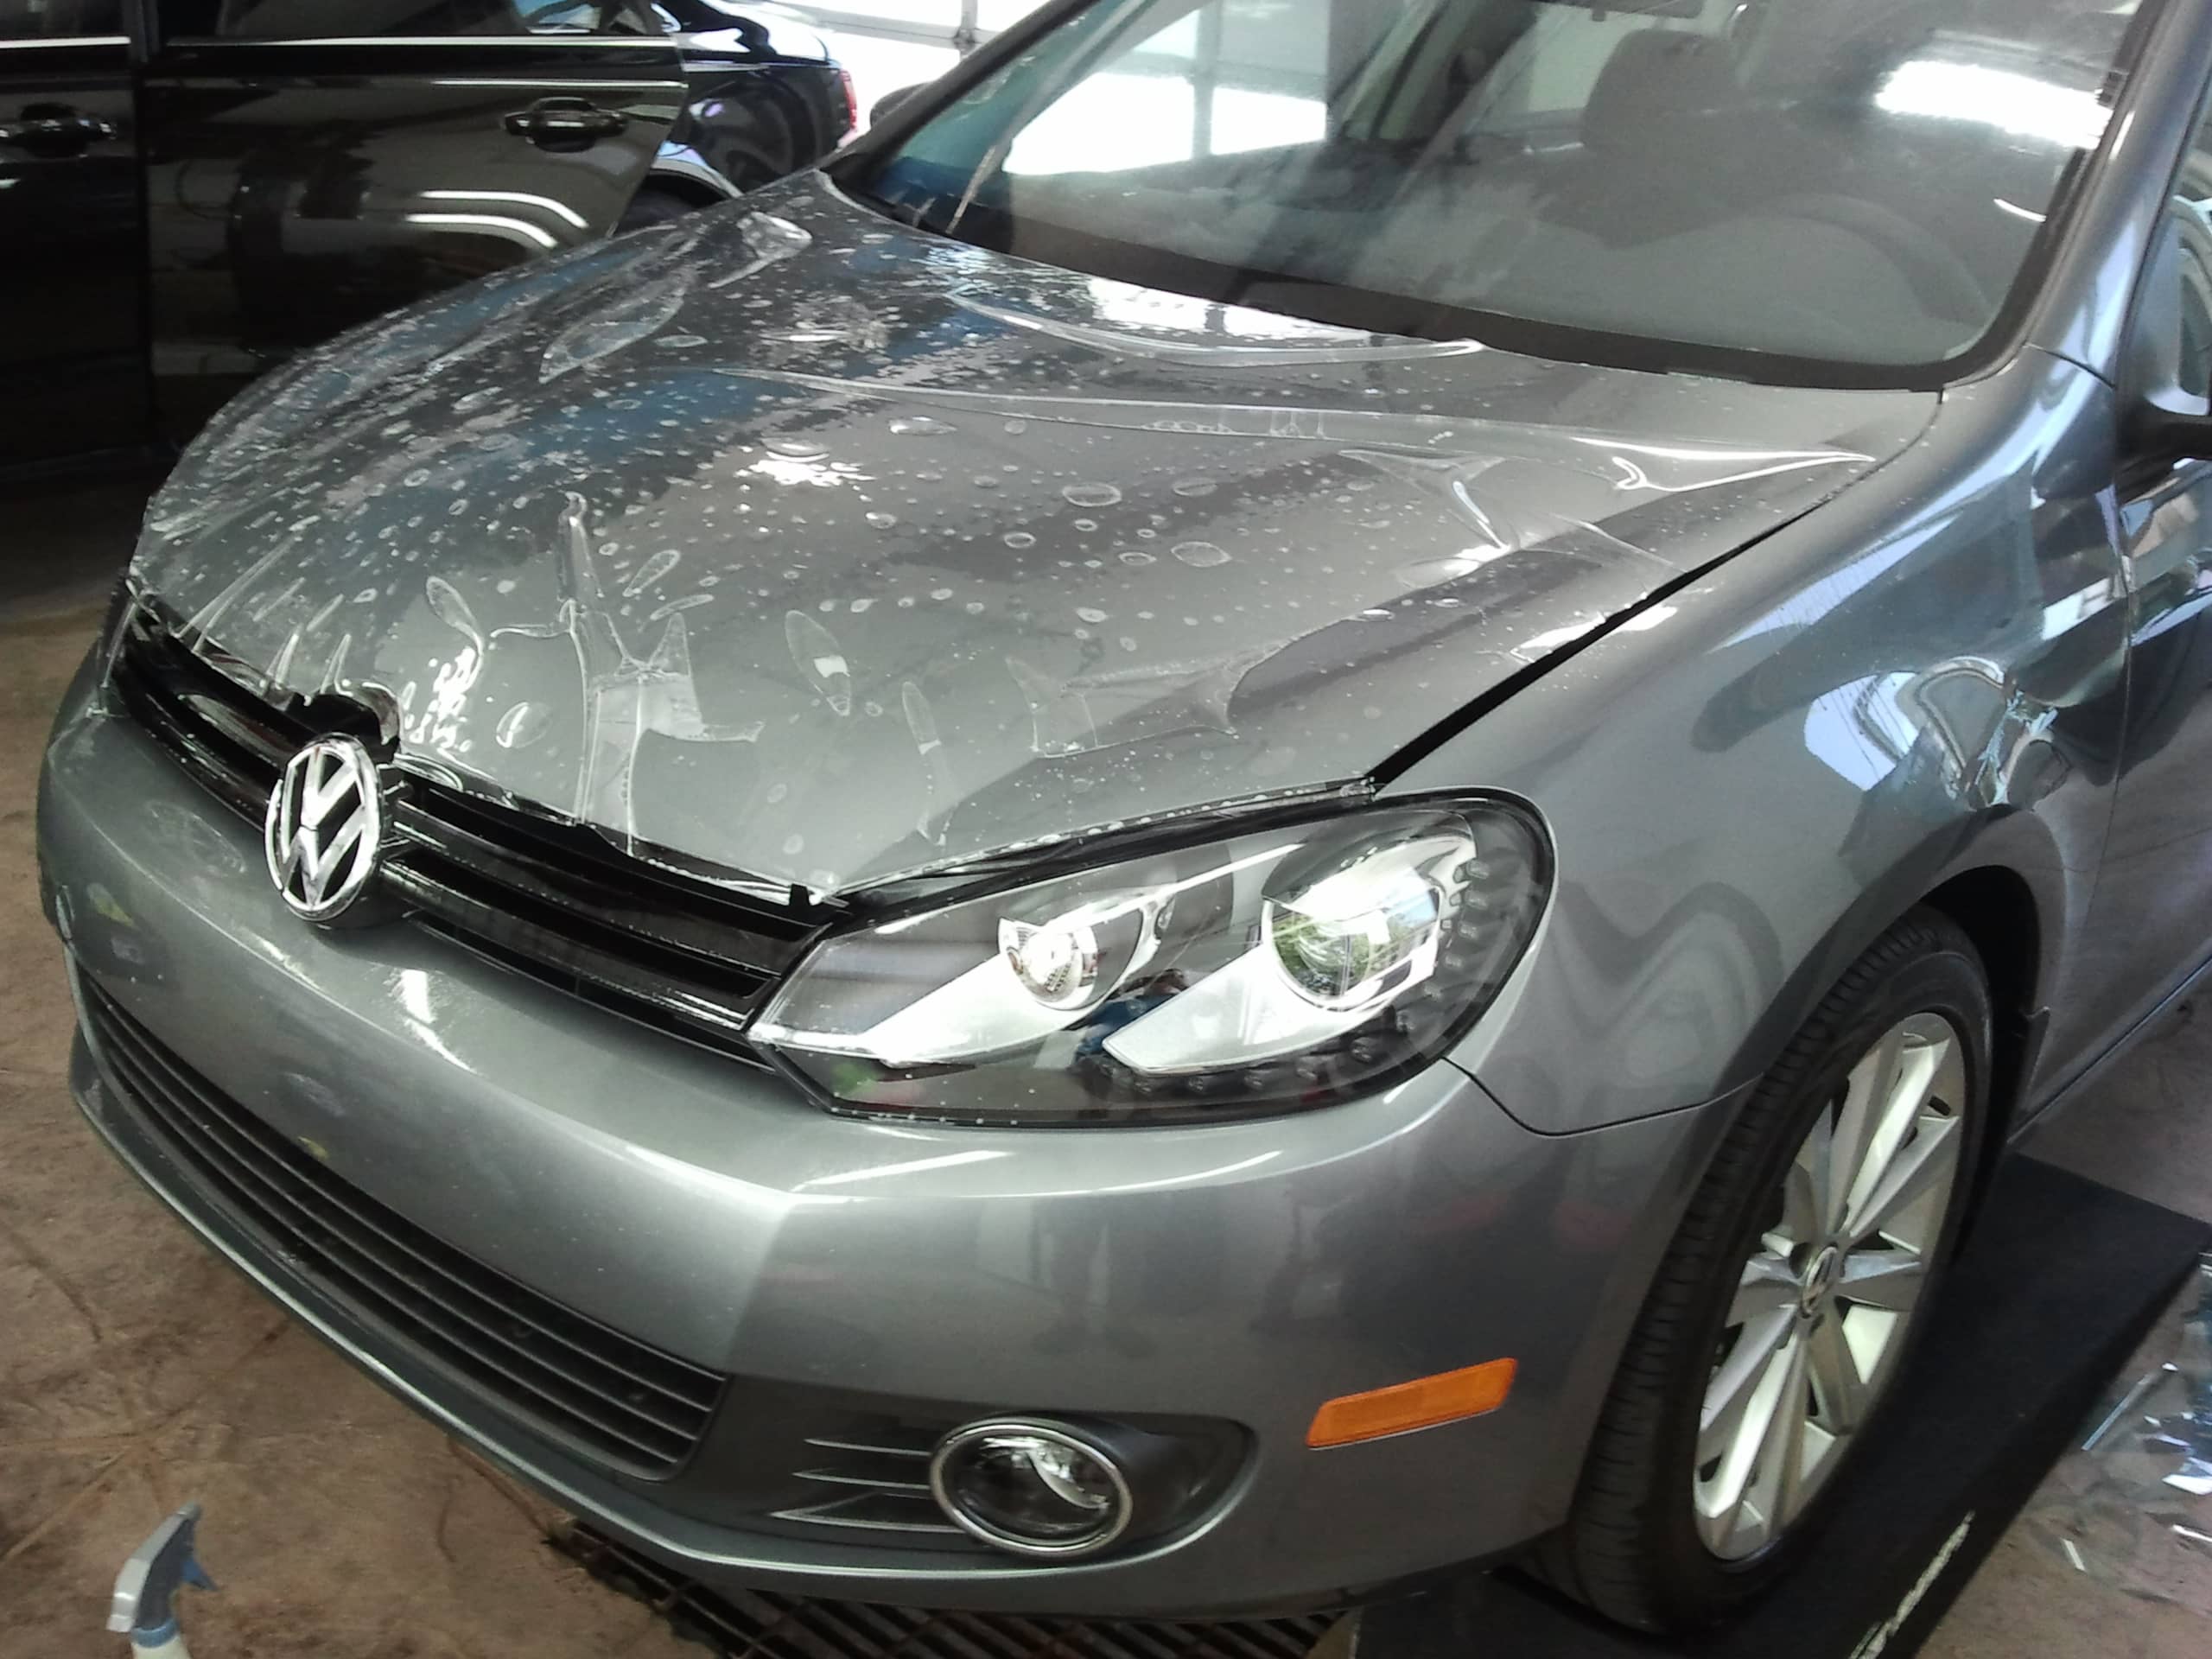 2012 VW Golf TDi 3M paint protection film on the hood and fenders, front bumper